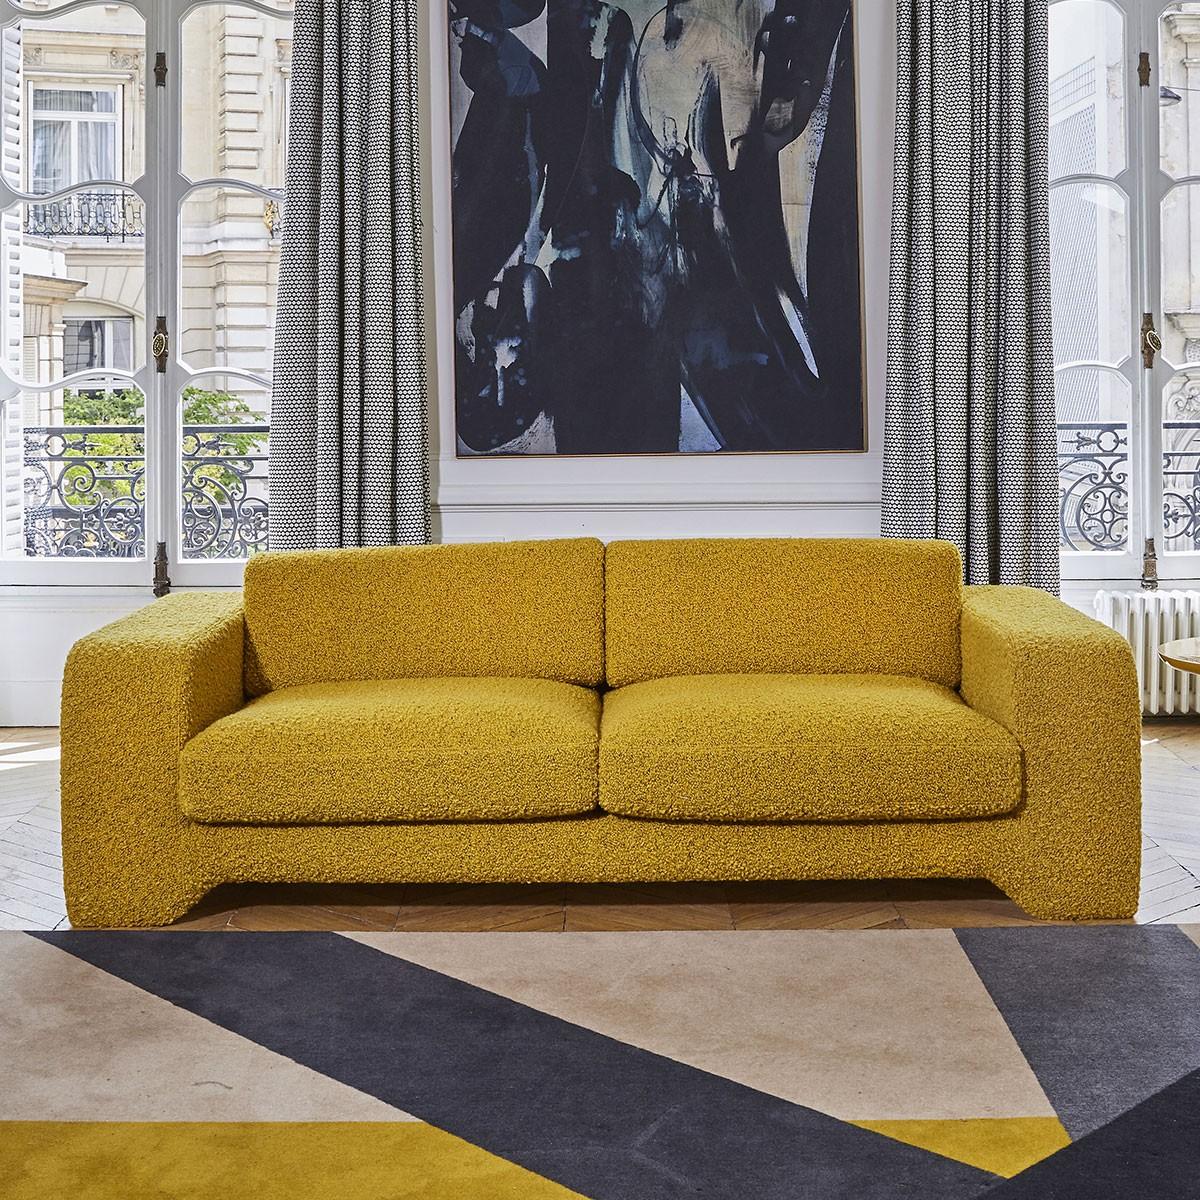 Popus Editions Giovanna 2.5 Seater Sofa in Mole Malmoe Terry Upholstery.

Giovanna is a sofa with a strong profile. A sober, plush line, with this famous detail that changes everything, so as not to forget its strength of character and this